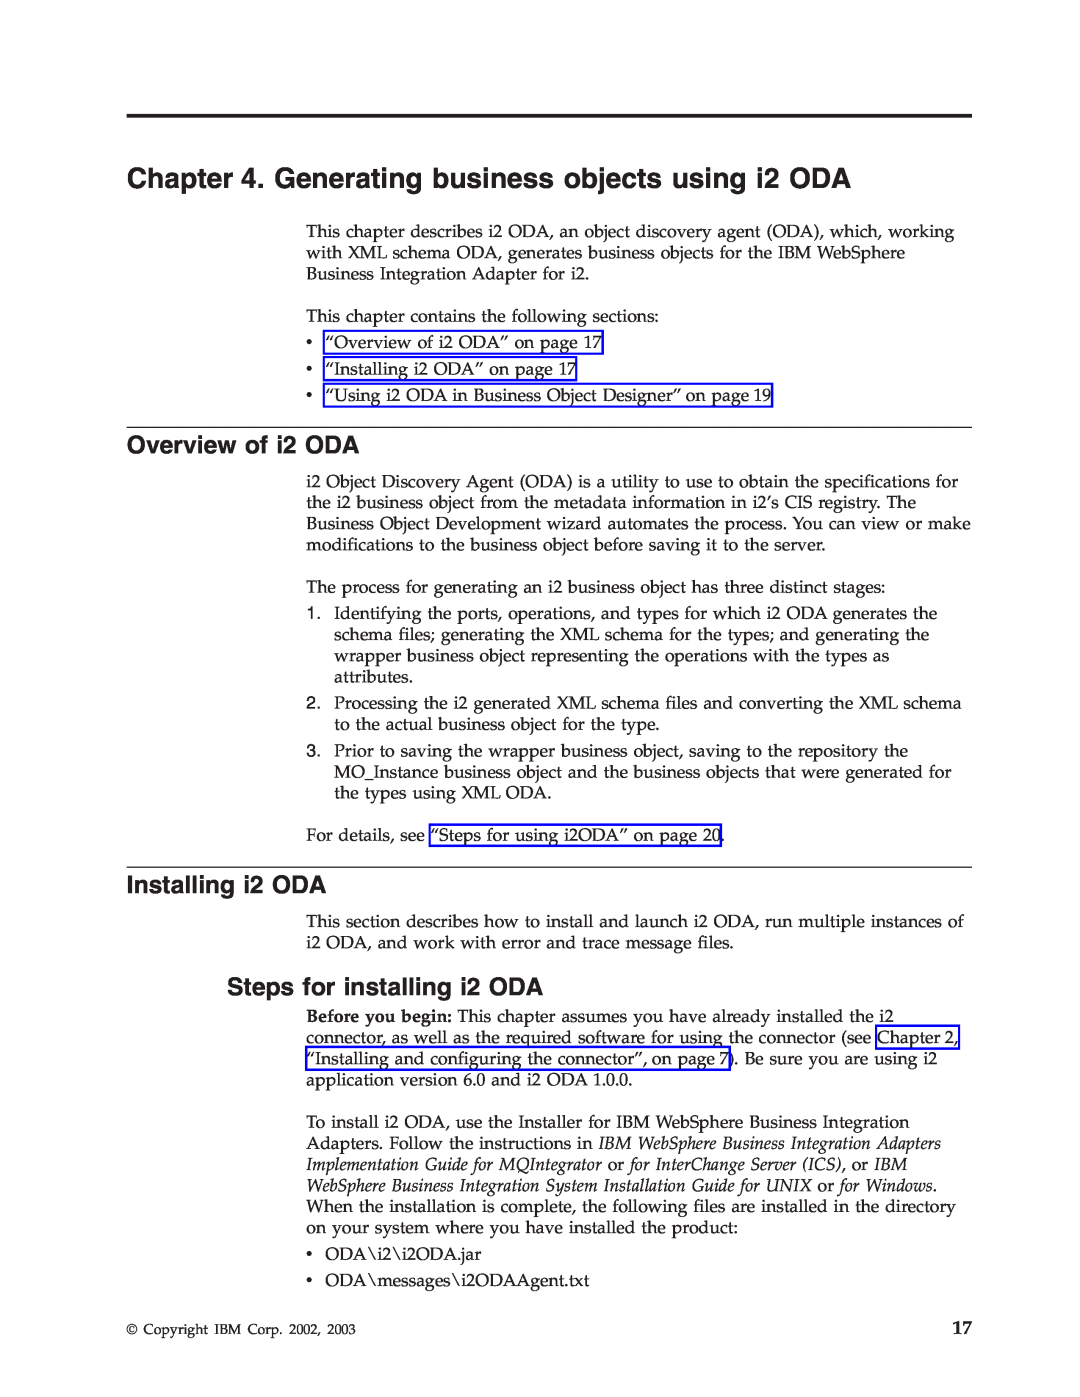 IBM WebSphere Business Integration Adapter Generating business objects using i2 ODA, Overview of i2 ODA, Installing i2 ODA 